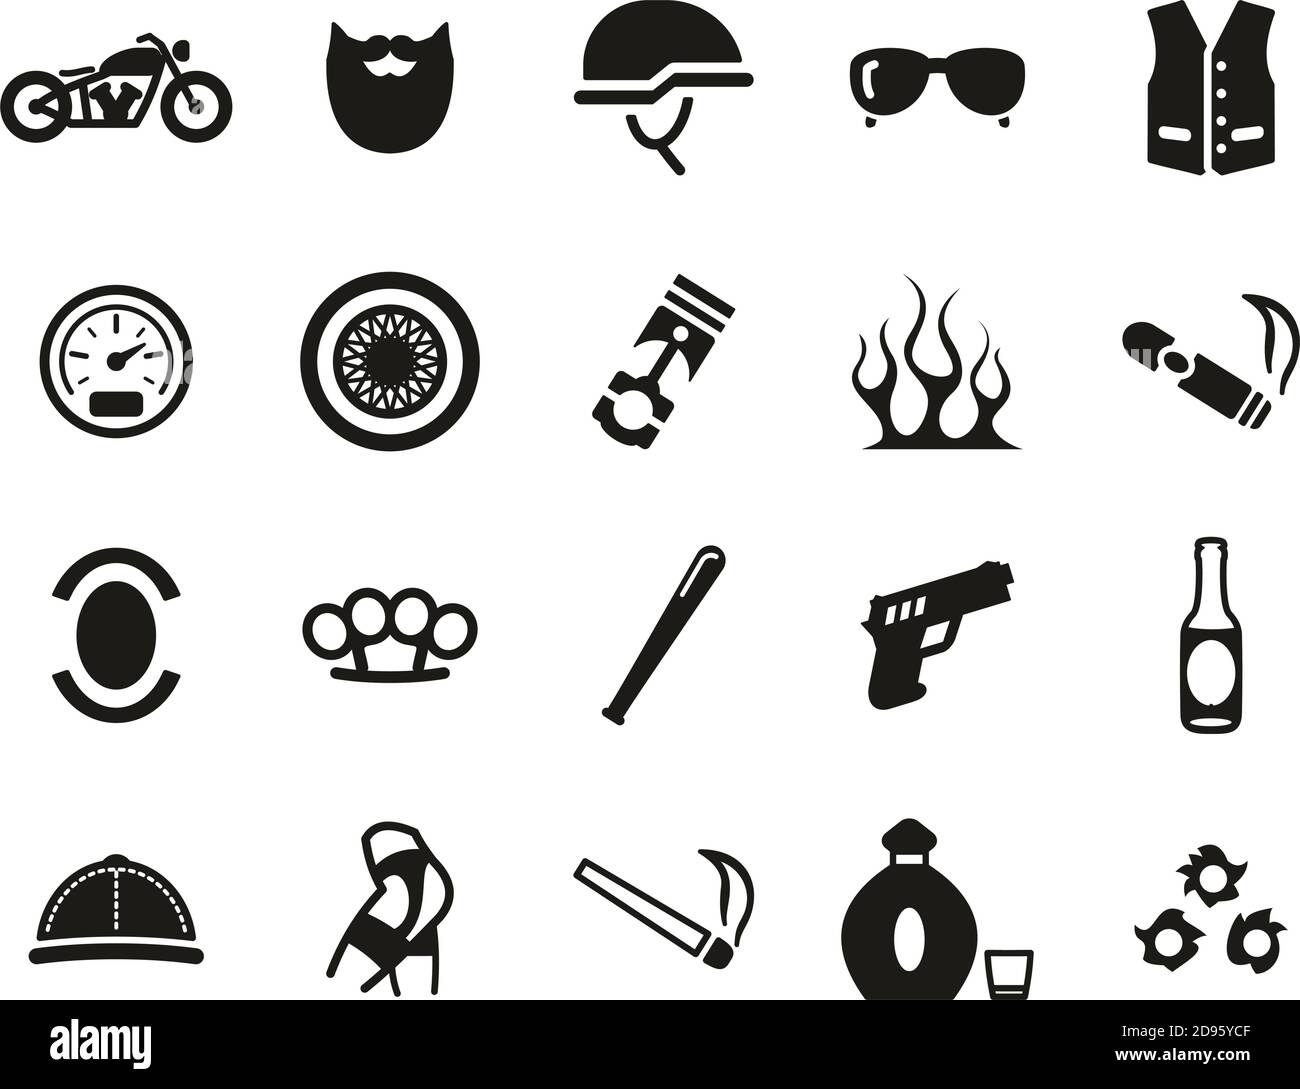 Motorcycle Club Or Motorcycle Gang Icons Black & White Set Big Stock Vector